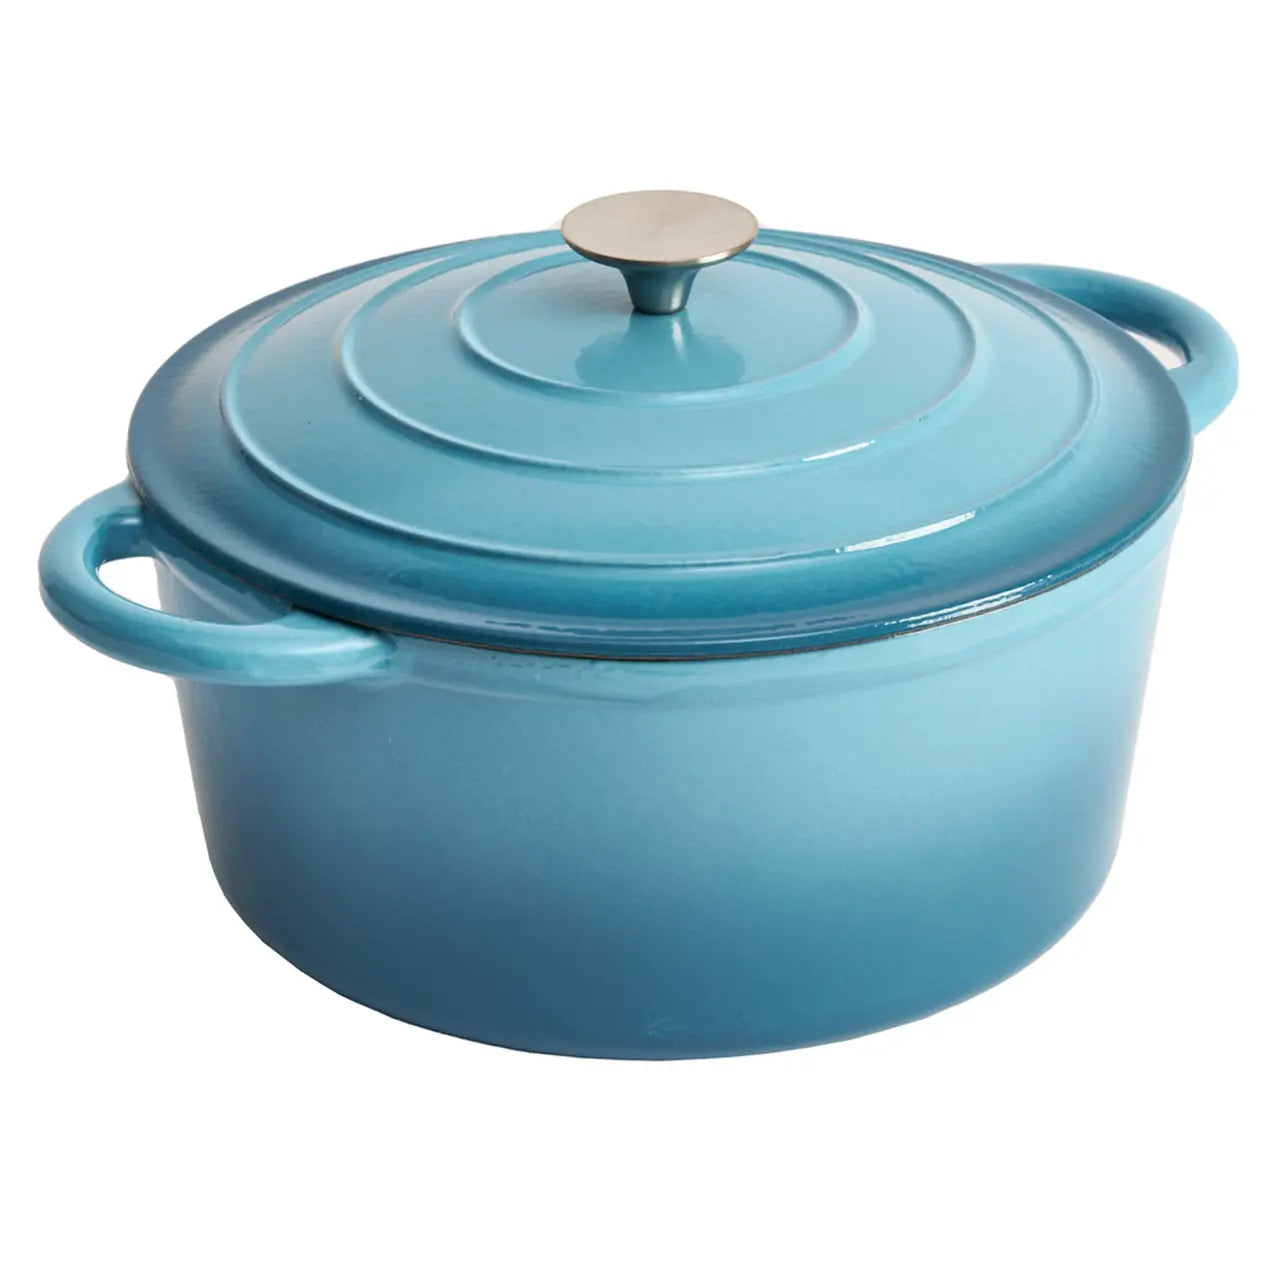 Enameled Cast Iron 11 inch Round Dutch Oven in Agave